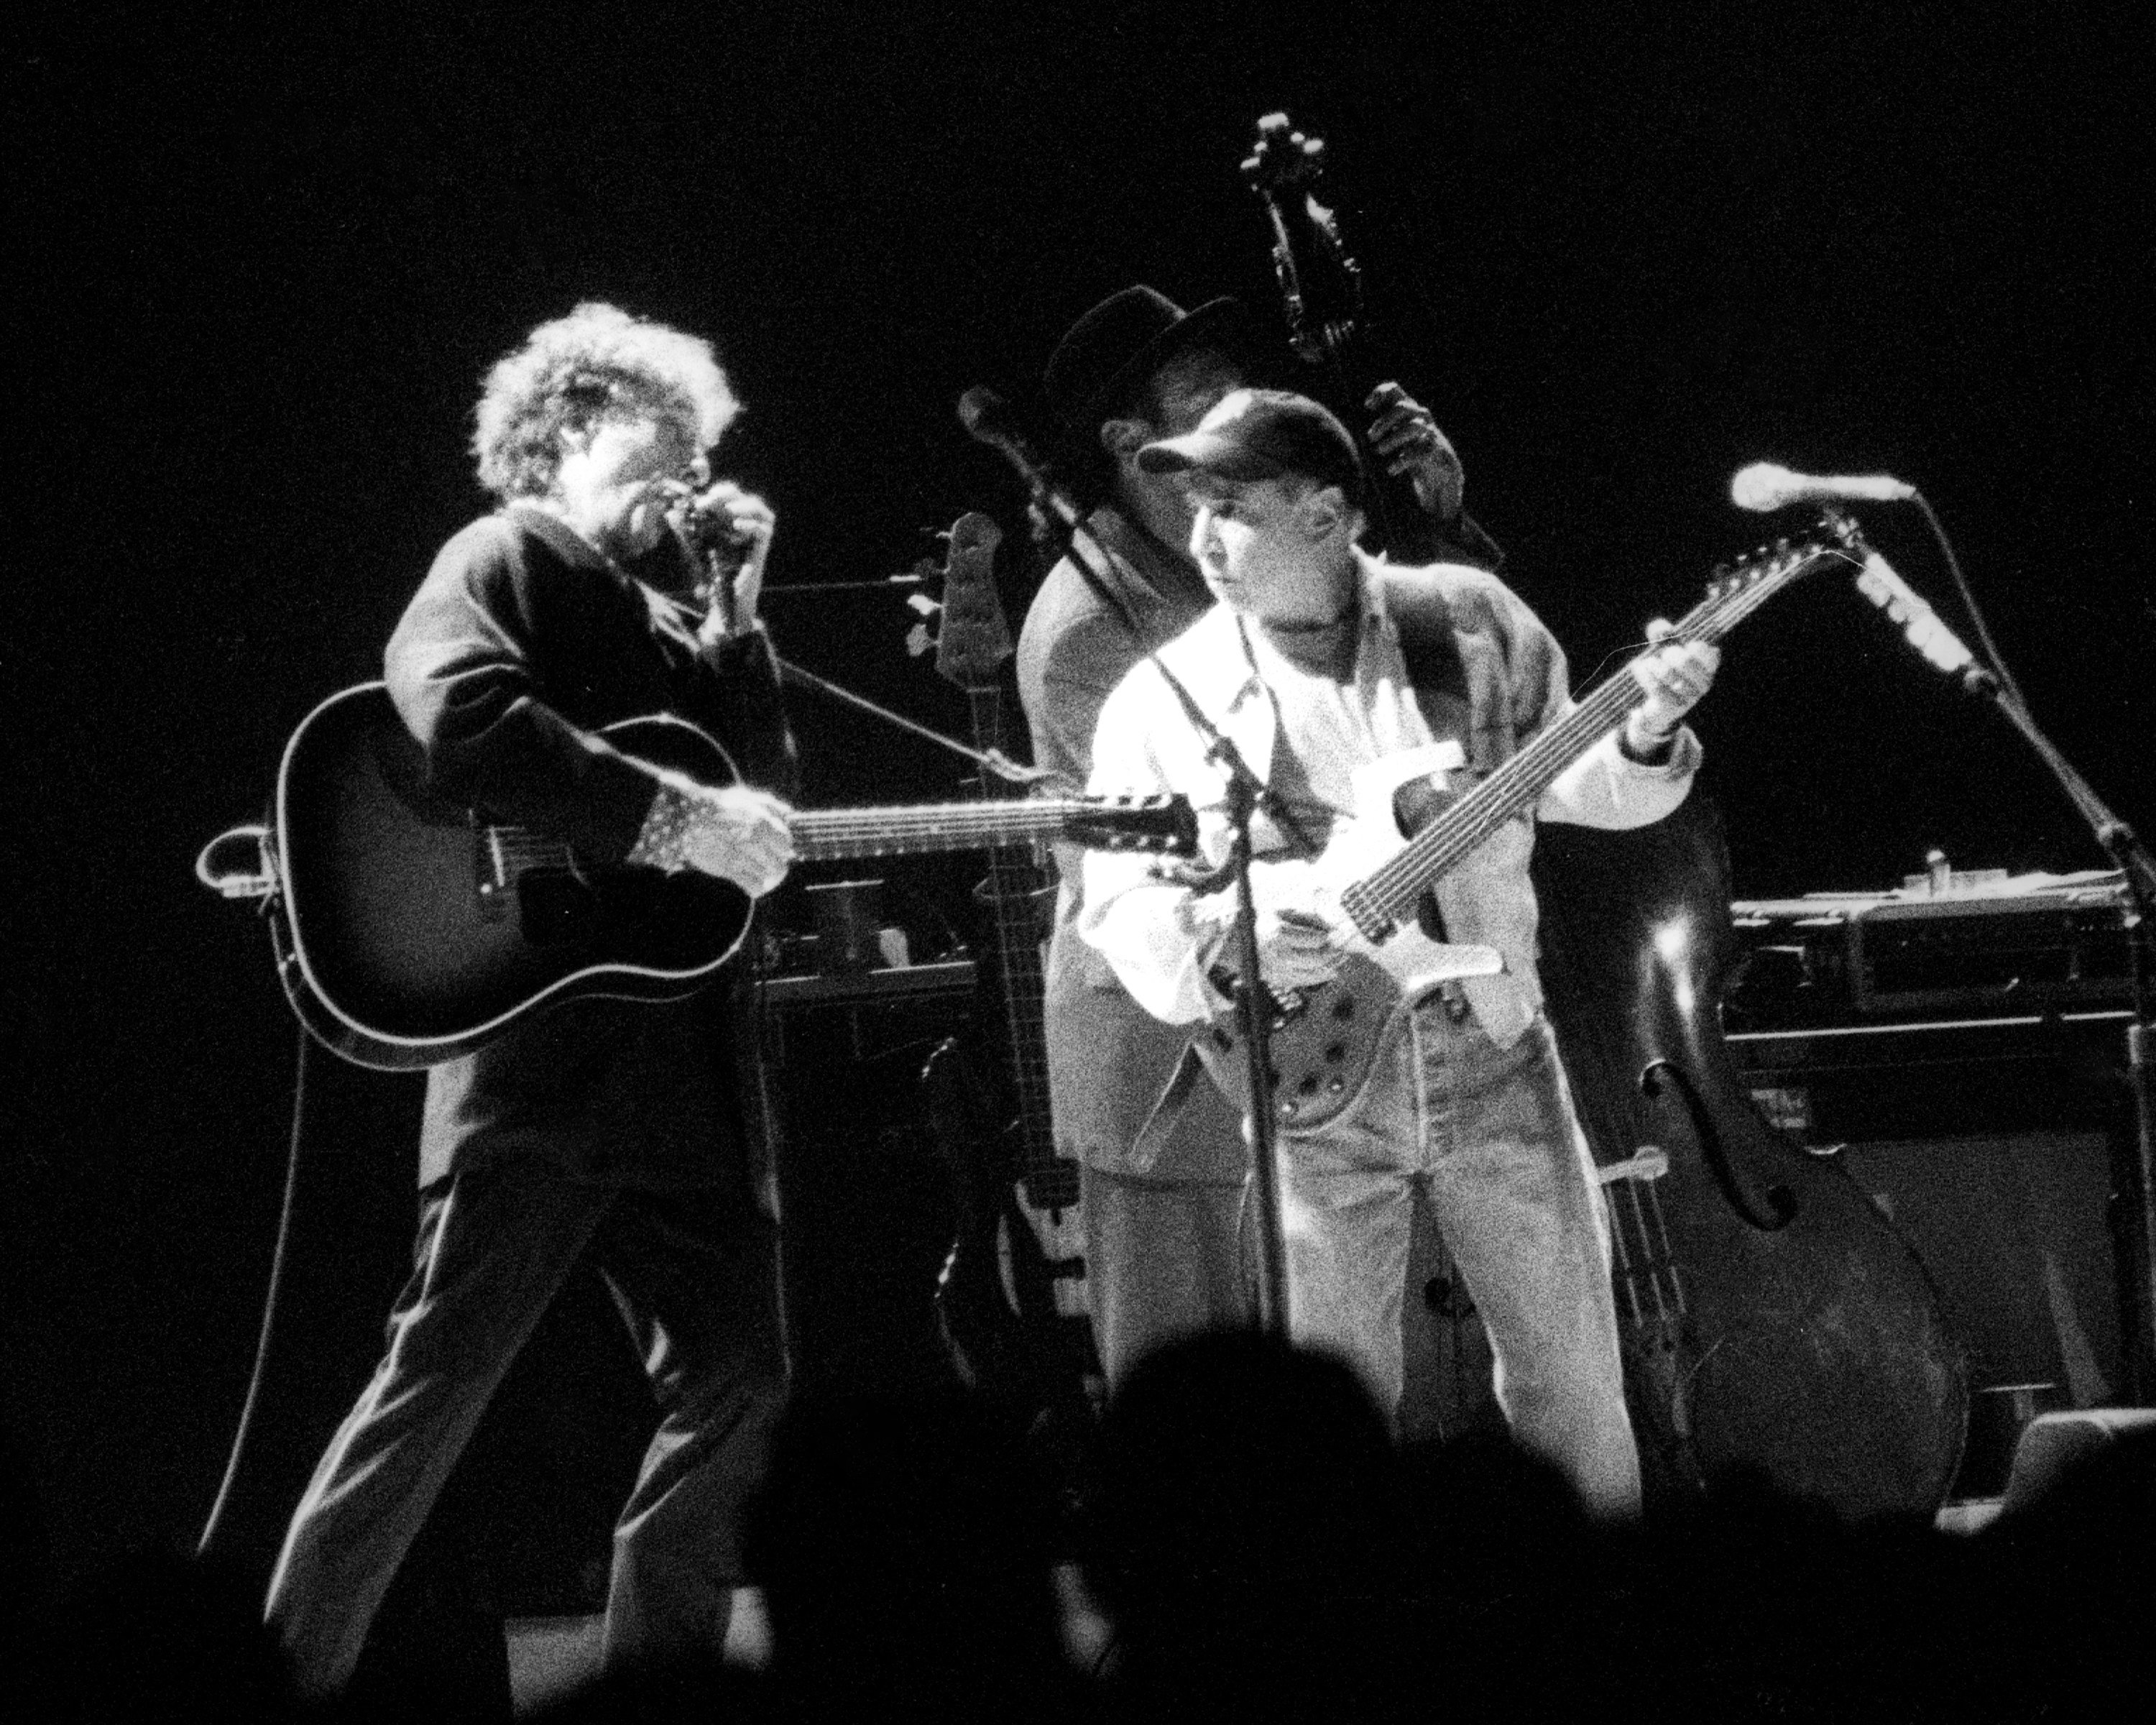 A black and white picture of Bob Dylan and Paul Simon onstage together with guitars. 